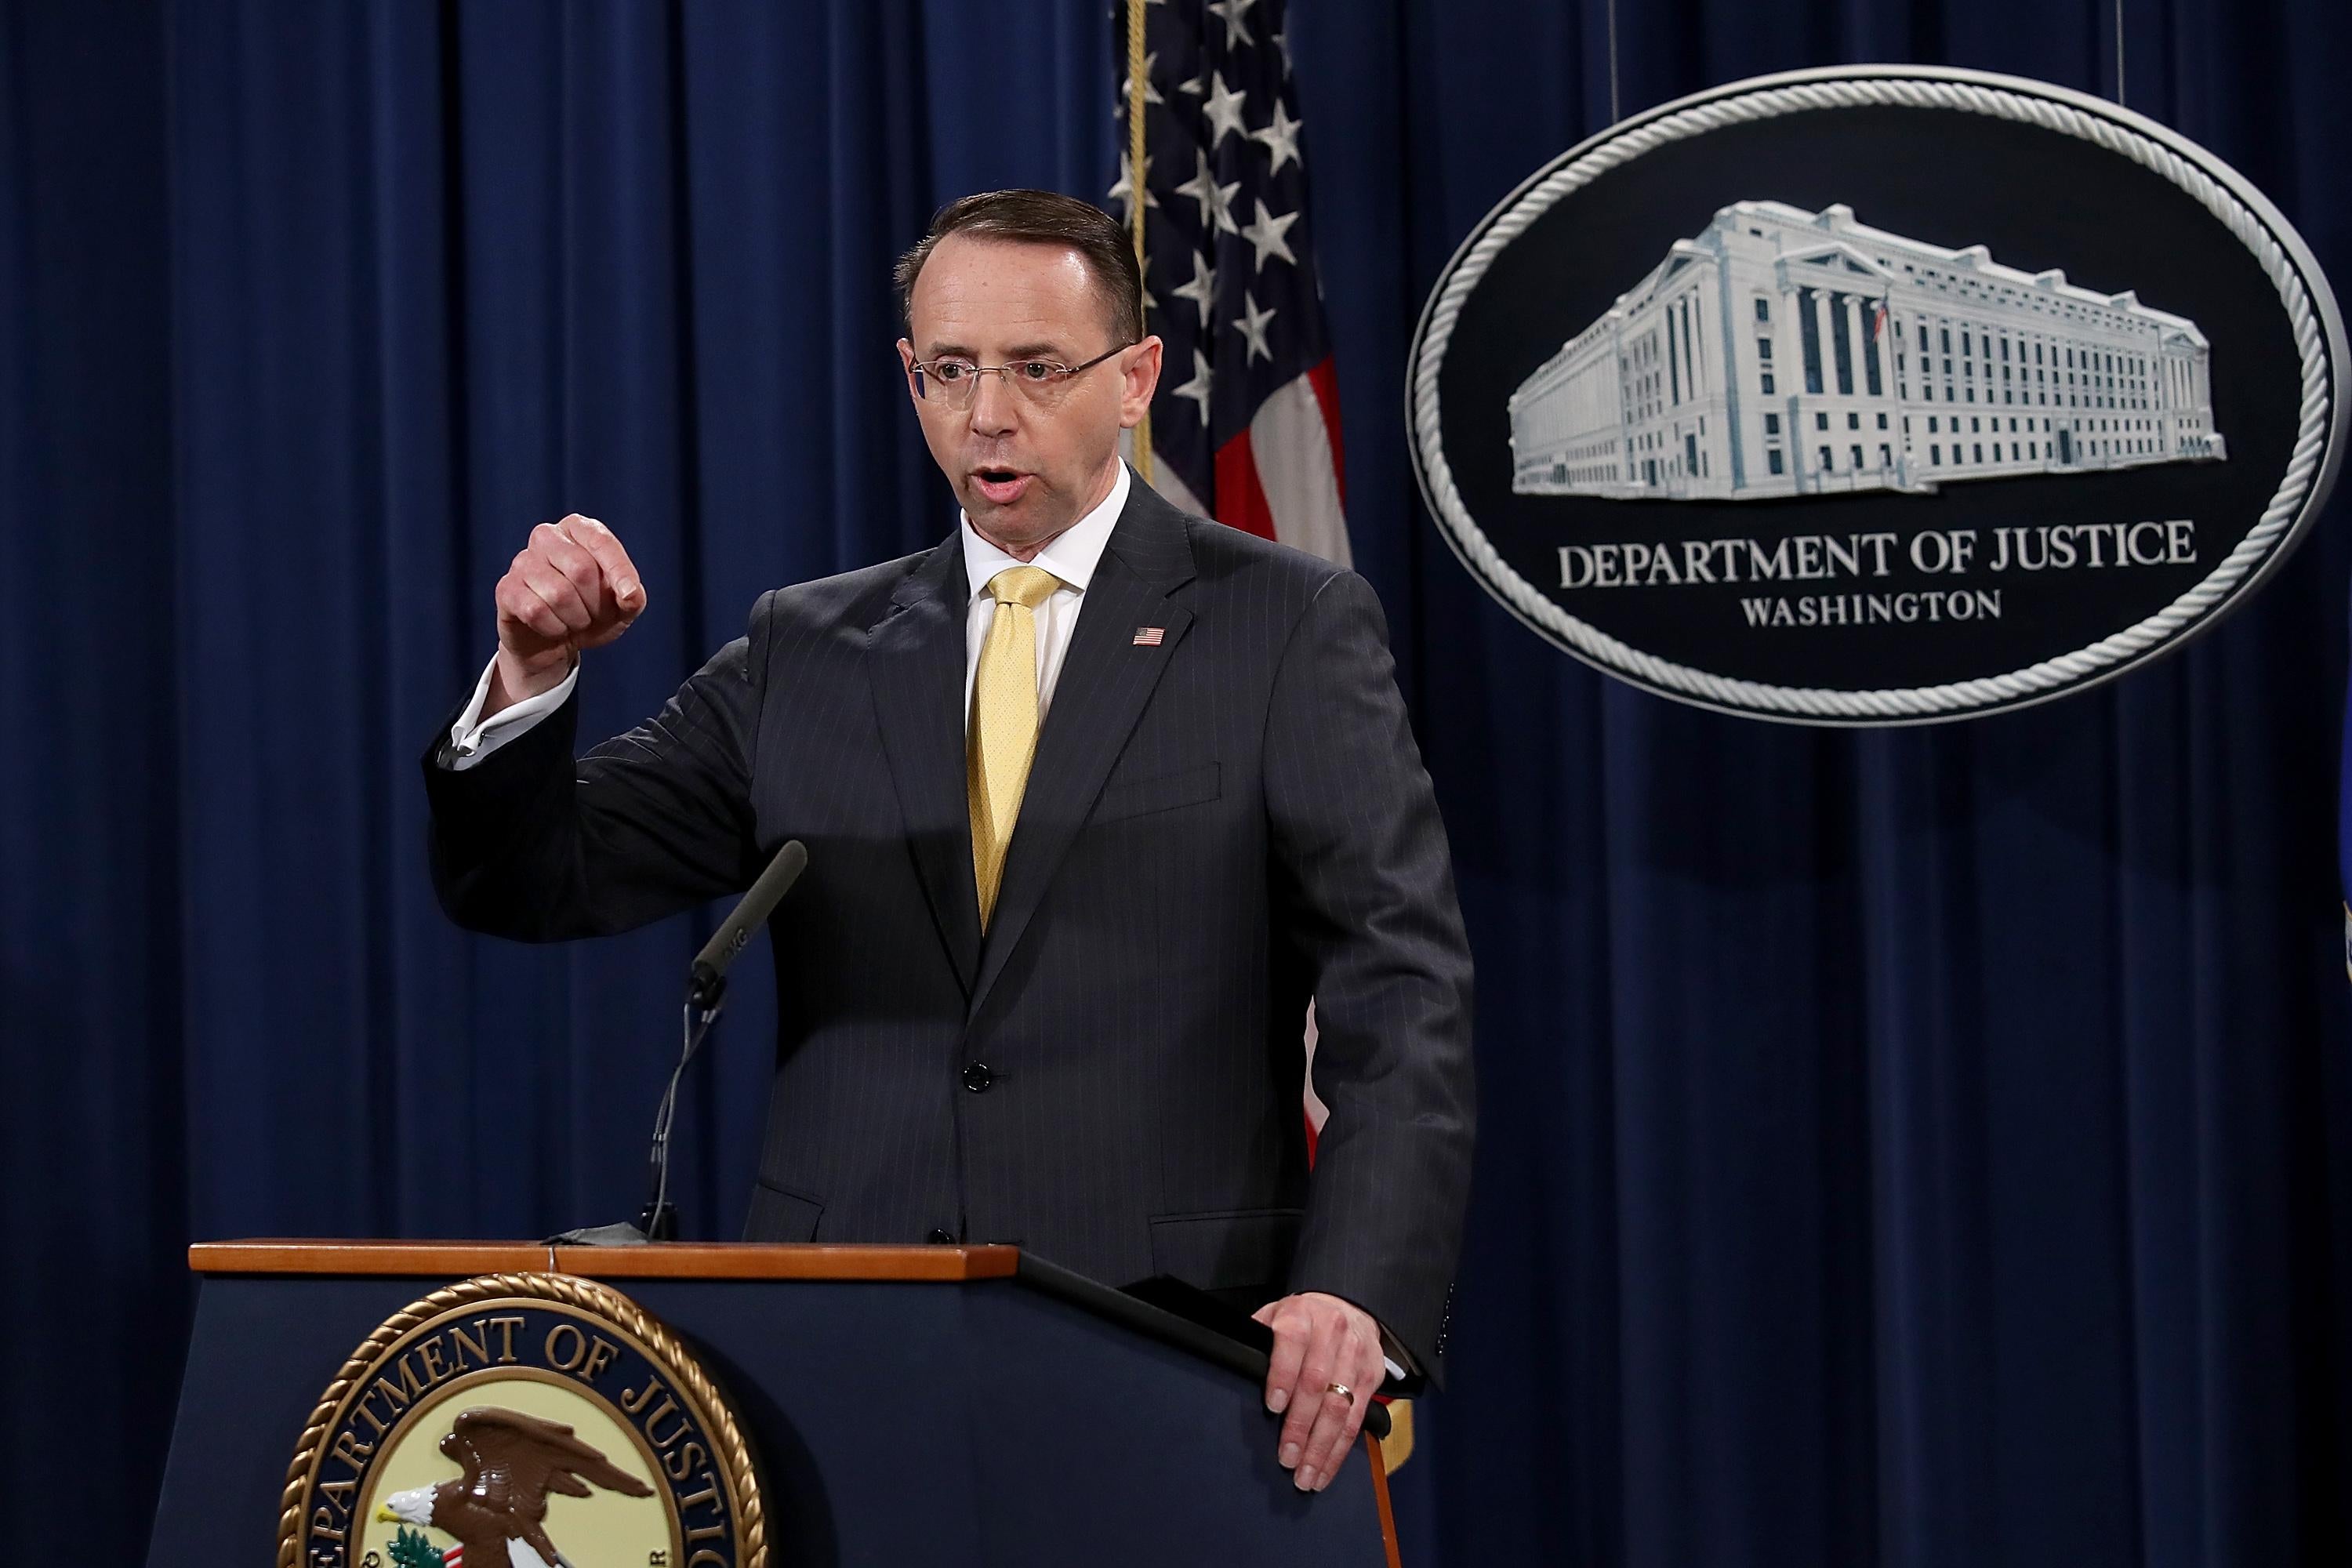 WASHINGTON, DC - FEBRUARY 16:  U.S. Deputy Attorney General Rod Rosenstein announces the indictment of 13 Russian nationals and 3 Russian organizations for meddling in the 2016 U.S. presidential election February 16, 2018 at the Justice Department in Washington, DC. The indictments are the first charges brought by special counsel Robert Mueller while investigating interference in the election.  (Photo by Win McNamee/Getty Images)